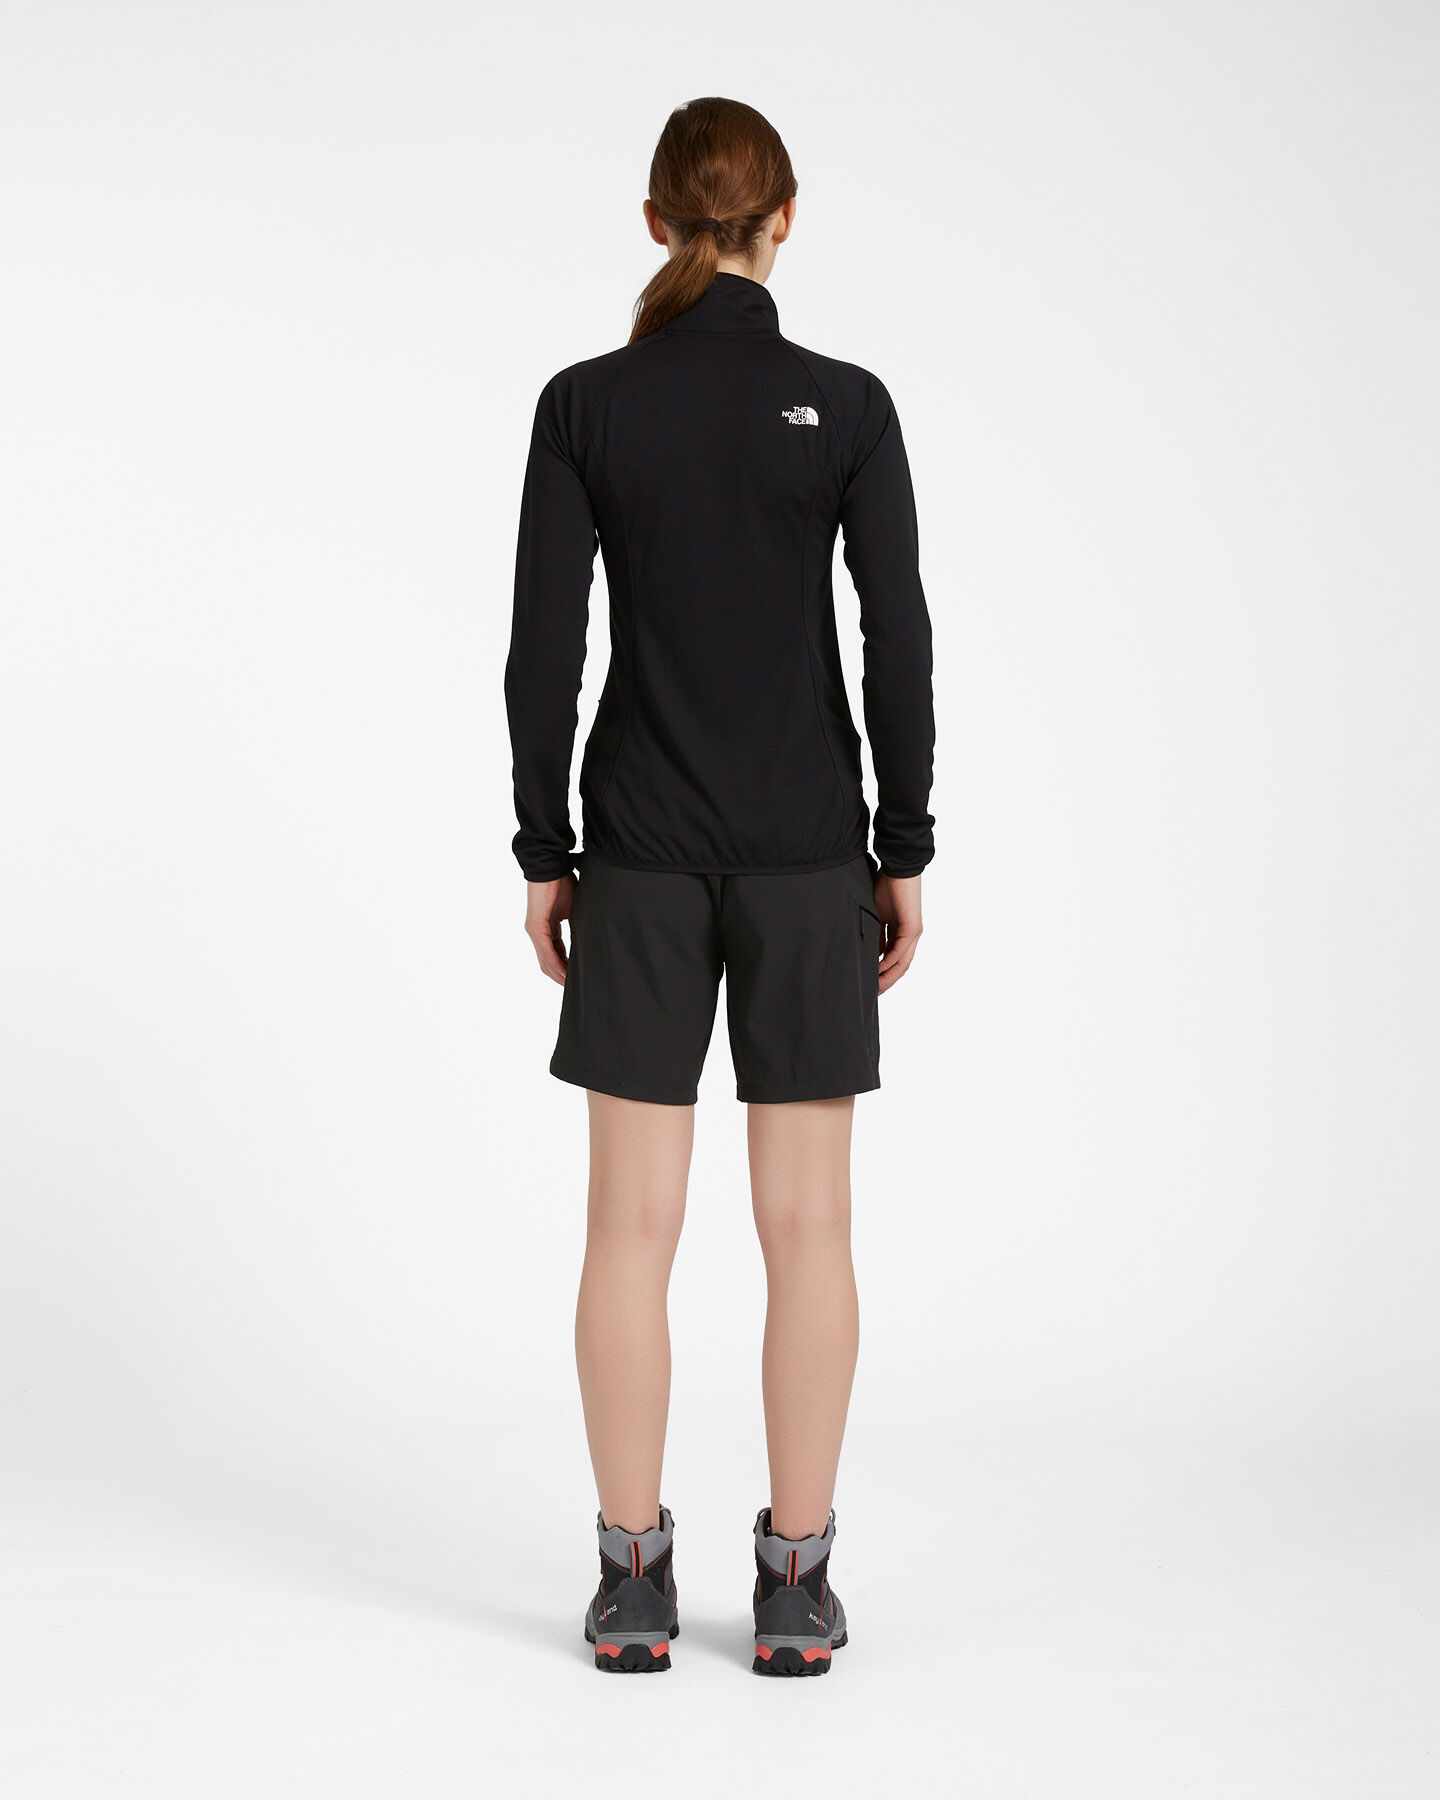  Pile THE NORTH FACE EXTENT III W S5181579|JK3|XS scatto 2